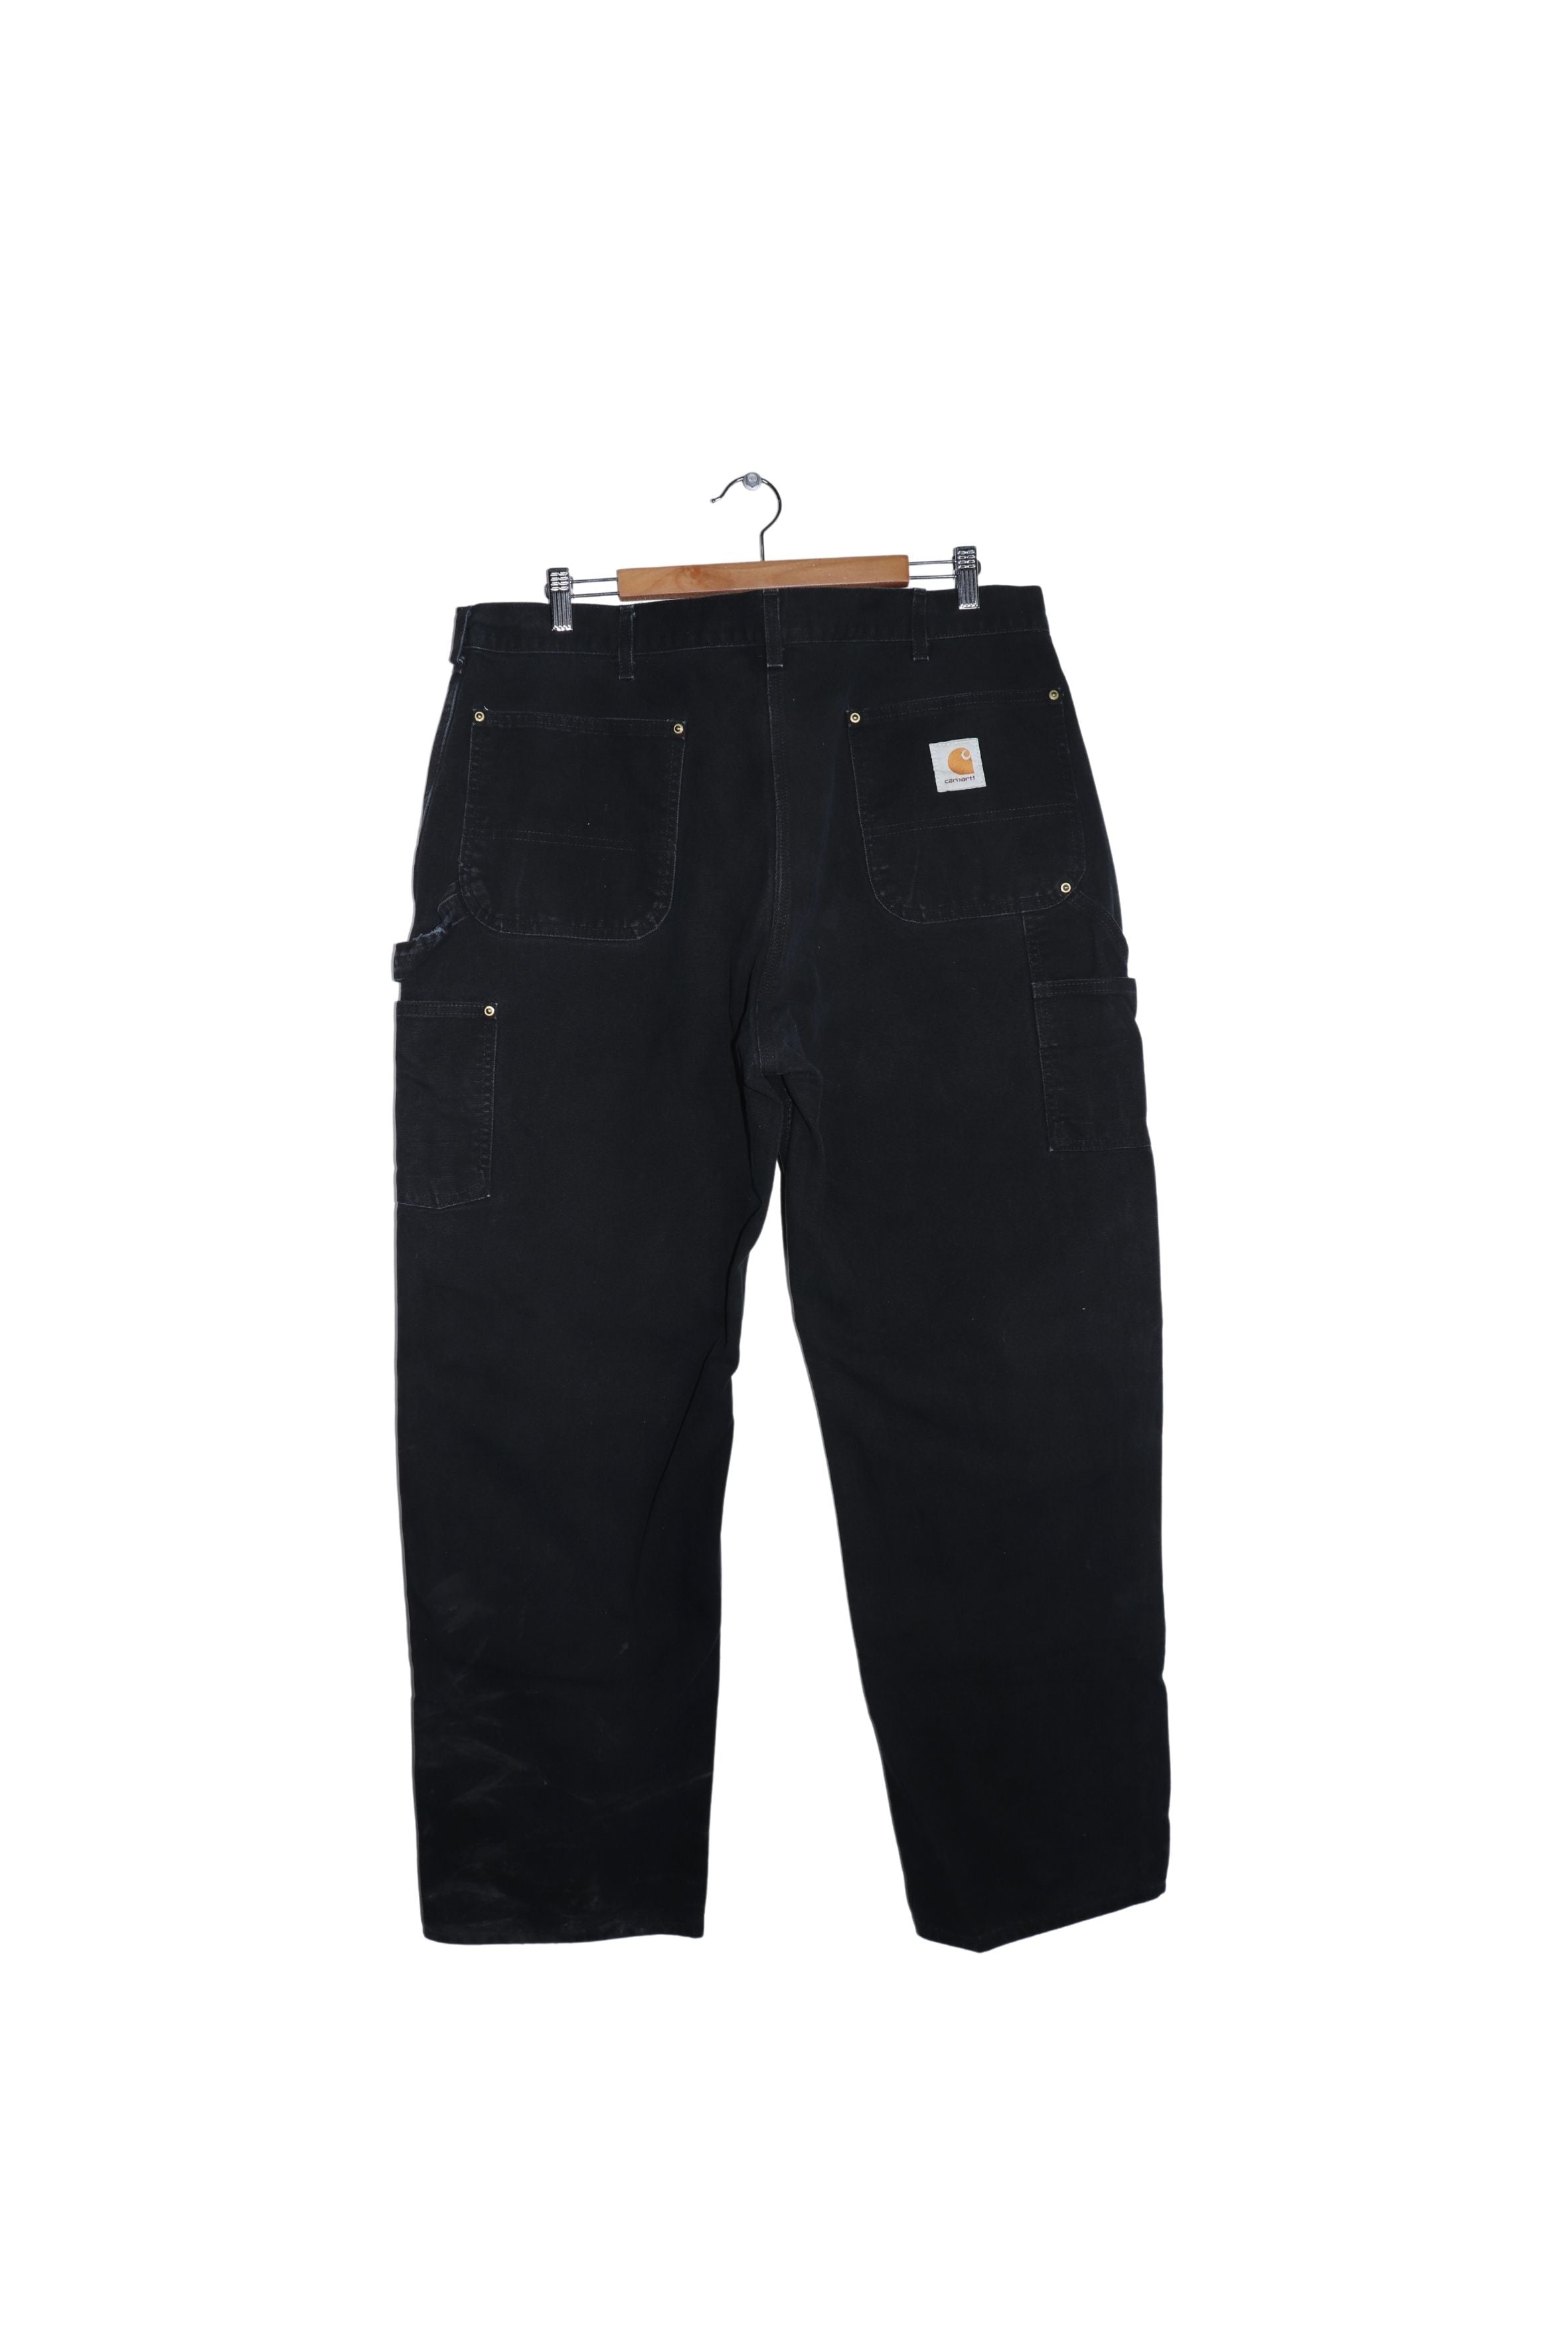 Vintage Carhartt Double Knee Thick Black Carpenter Pants – Curated by ...